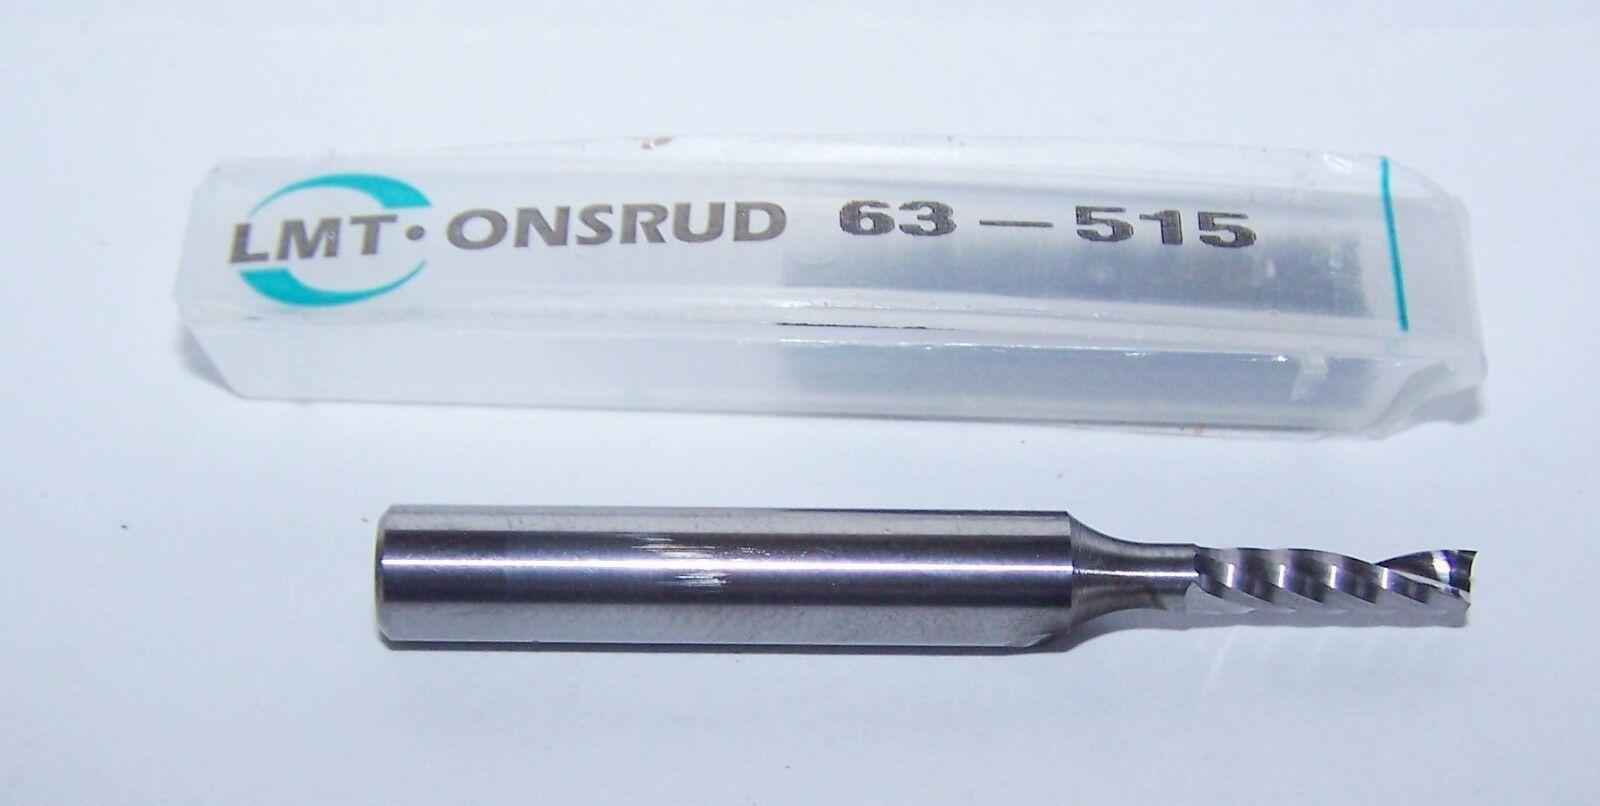 Onsrud Logo - Onsrud 63 515 Routing End Mill Up O Flute 1 8 1 2 2